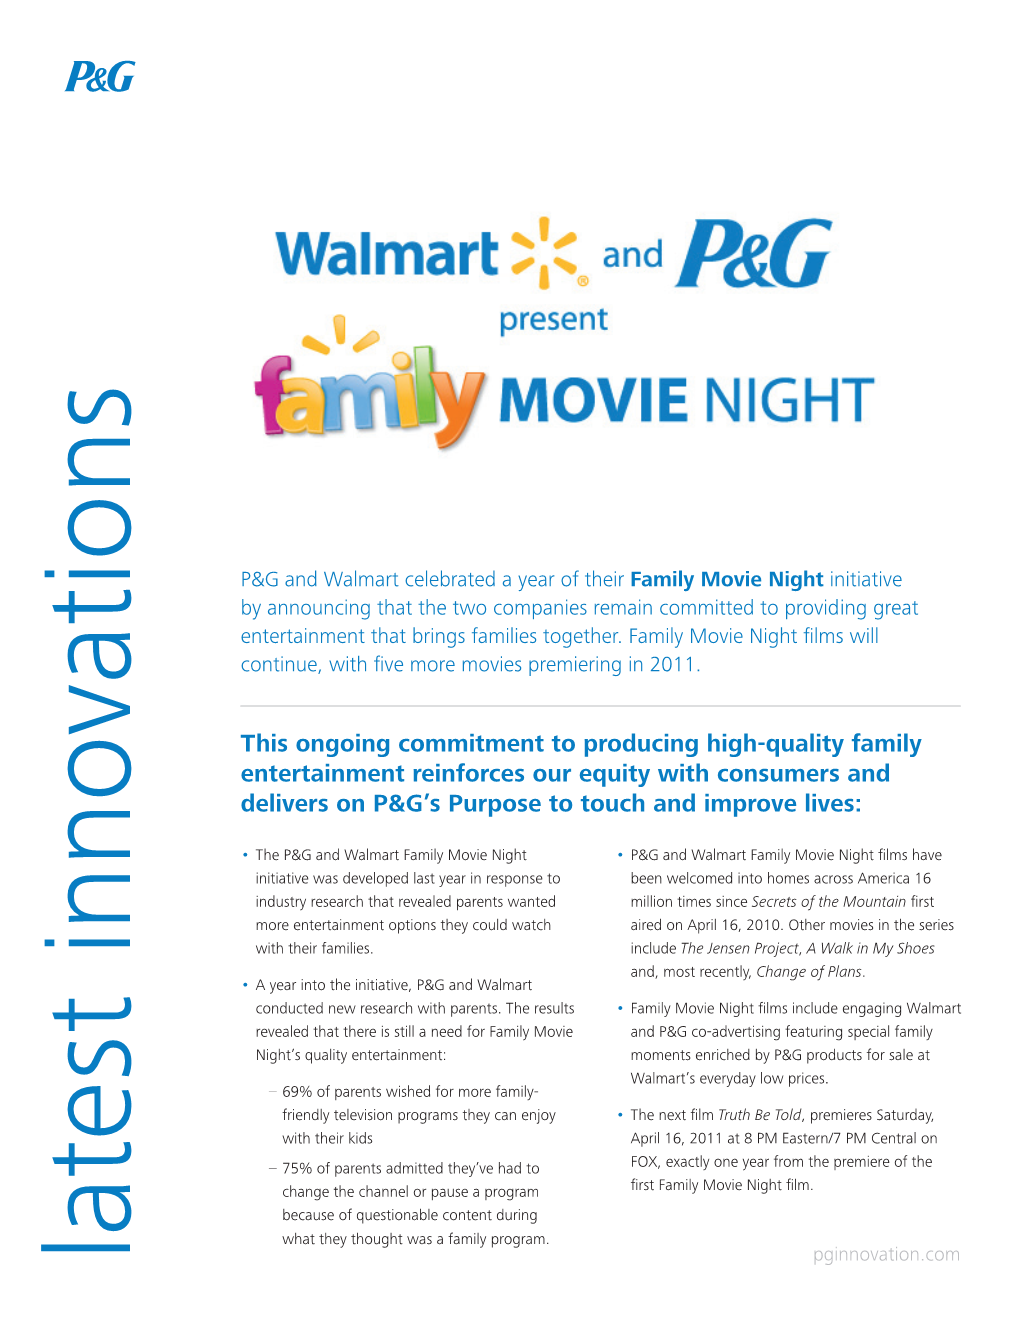 This Ongoing Commitment to Producing High-Quality Family Entertainment Reinforces Our Equity with Consumers and Delivers on P&G’S Purpose to Touch and Improve Lives